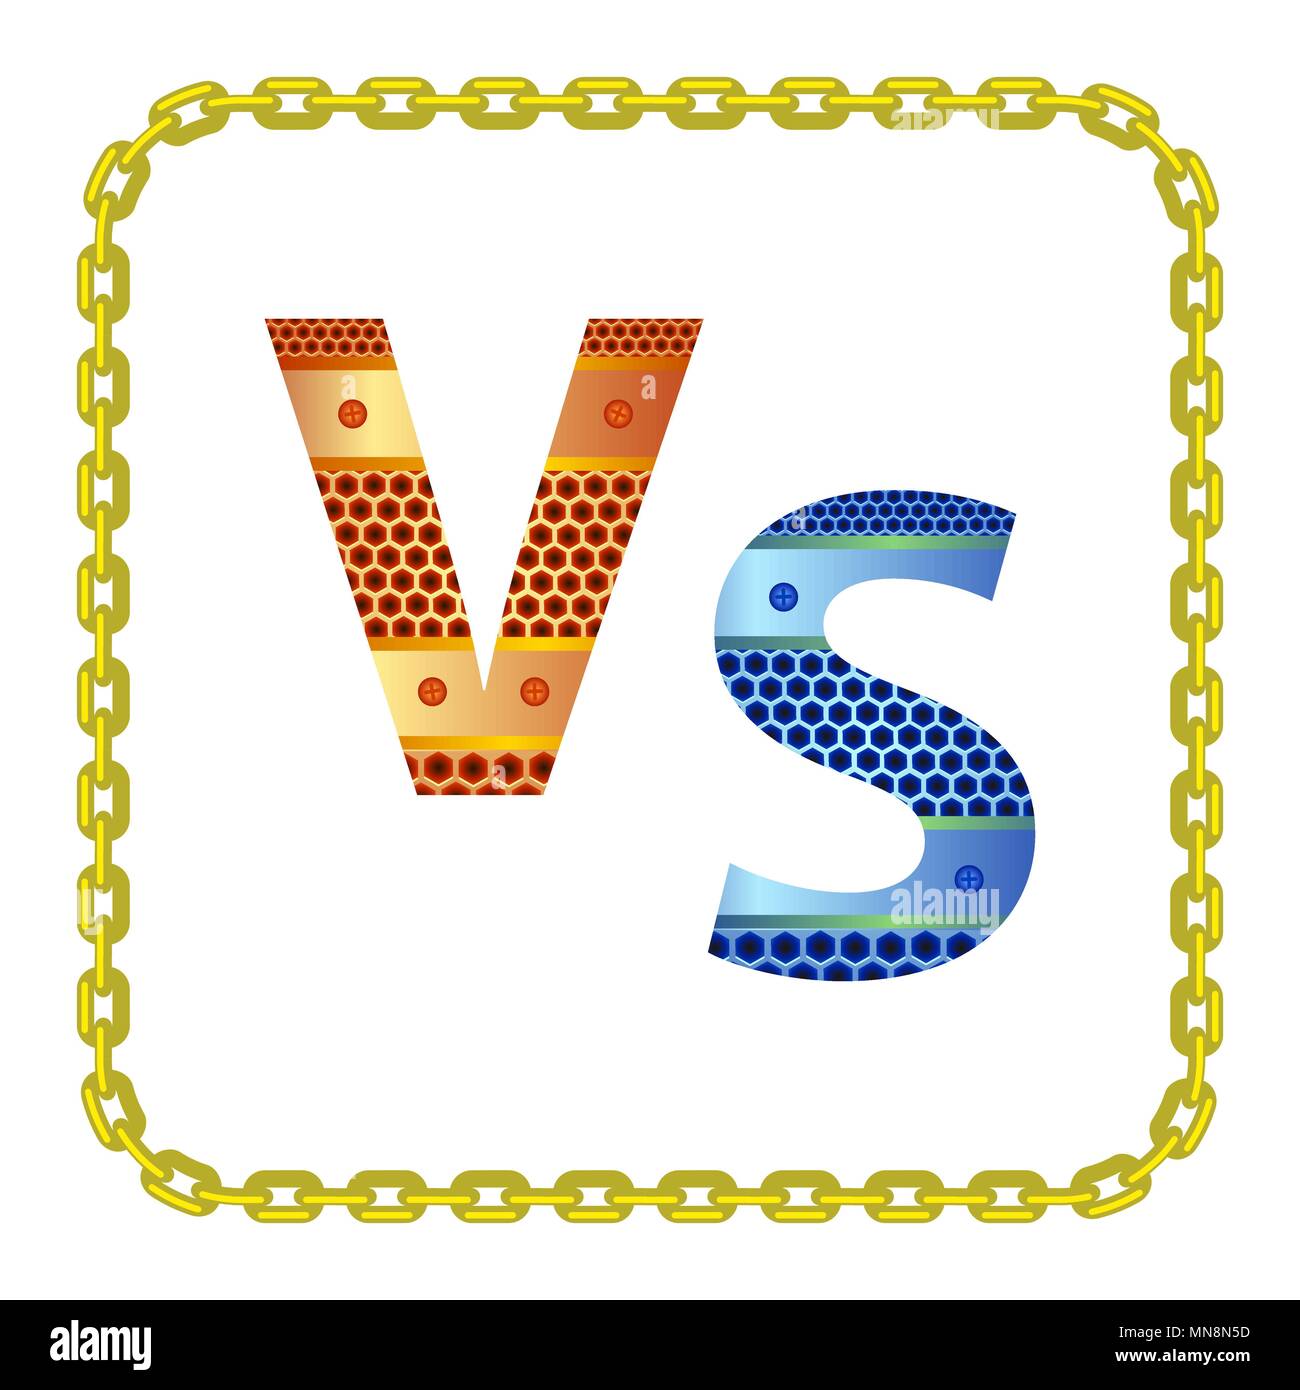 Concept of Confrontation, Final Fighting. Versus VS Letters Fight Background with Gold Chain Frame Stock Vector